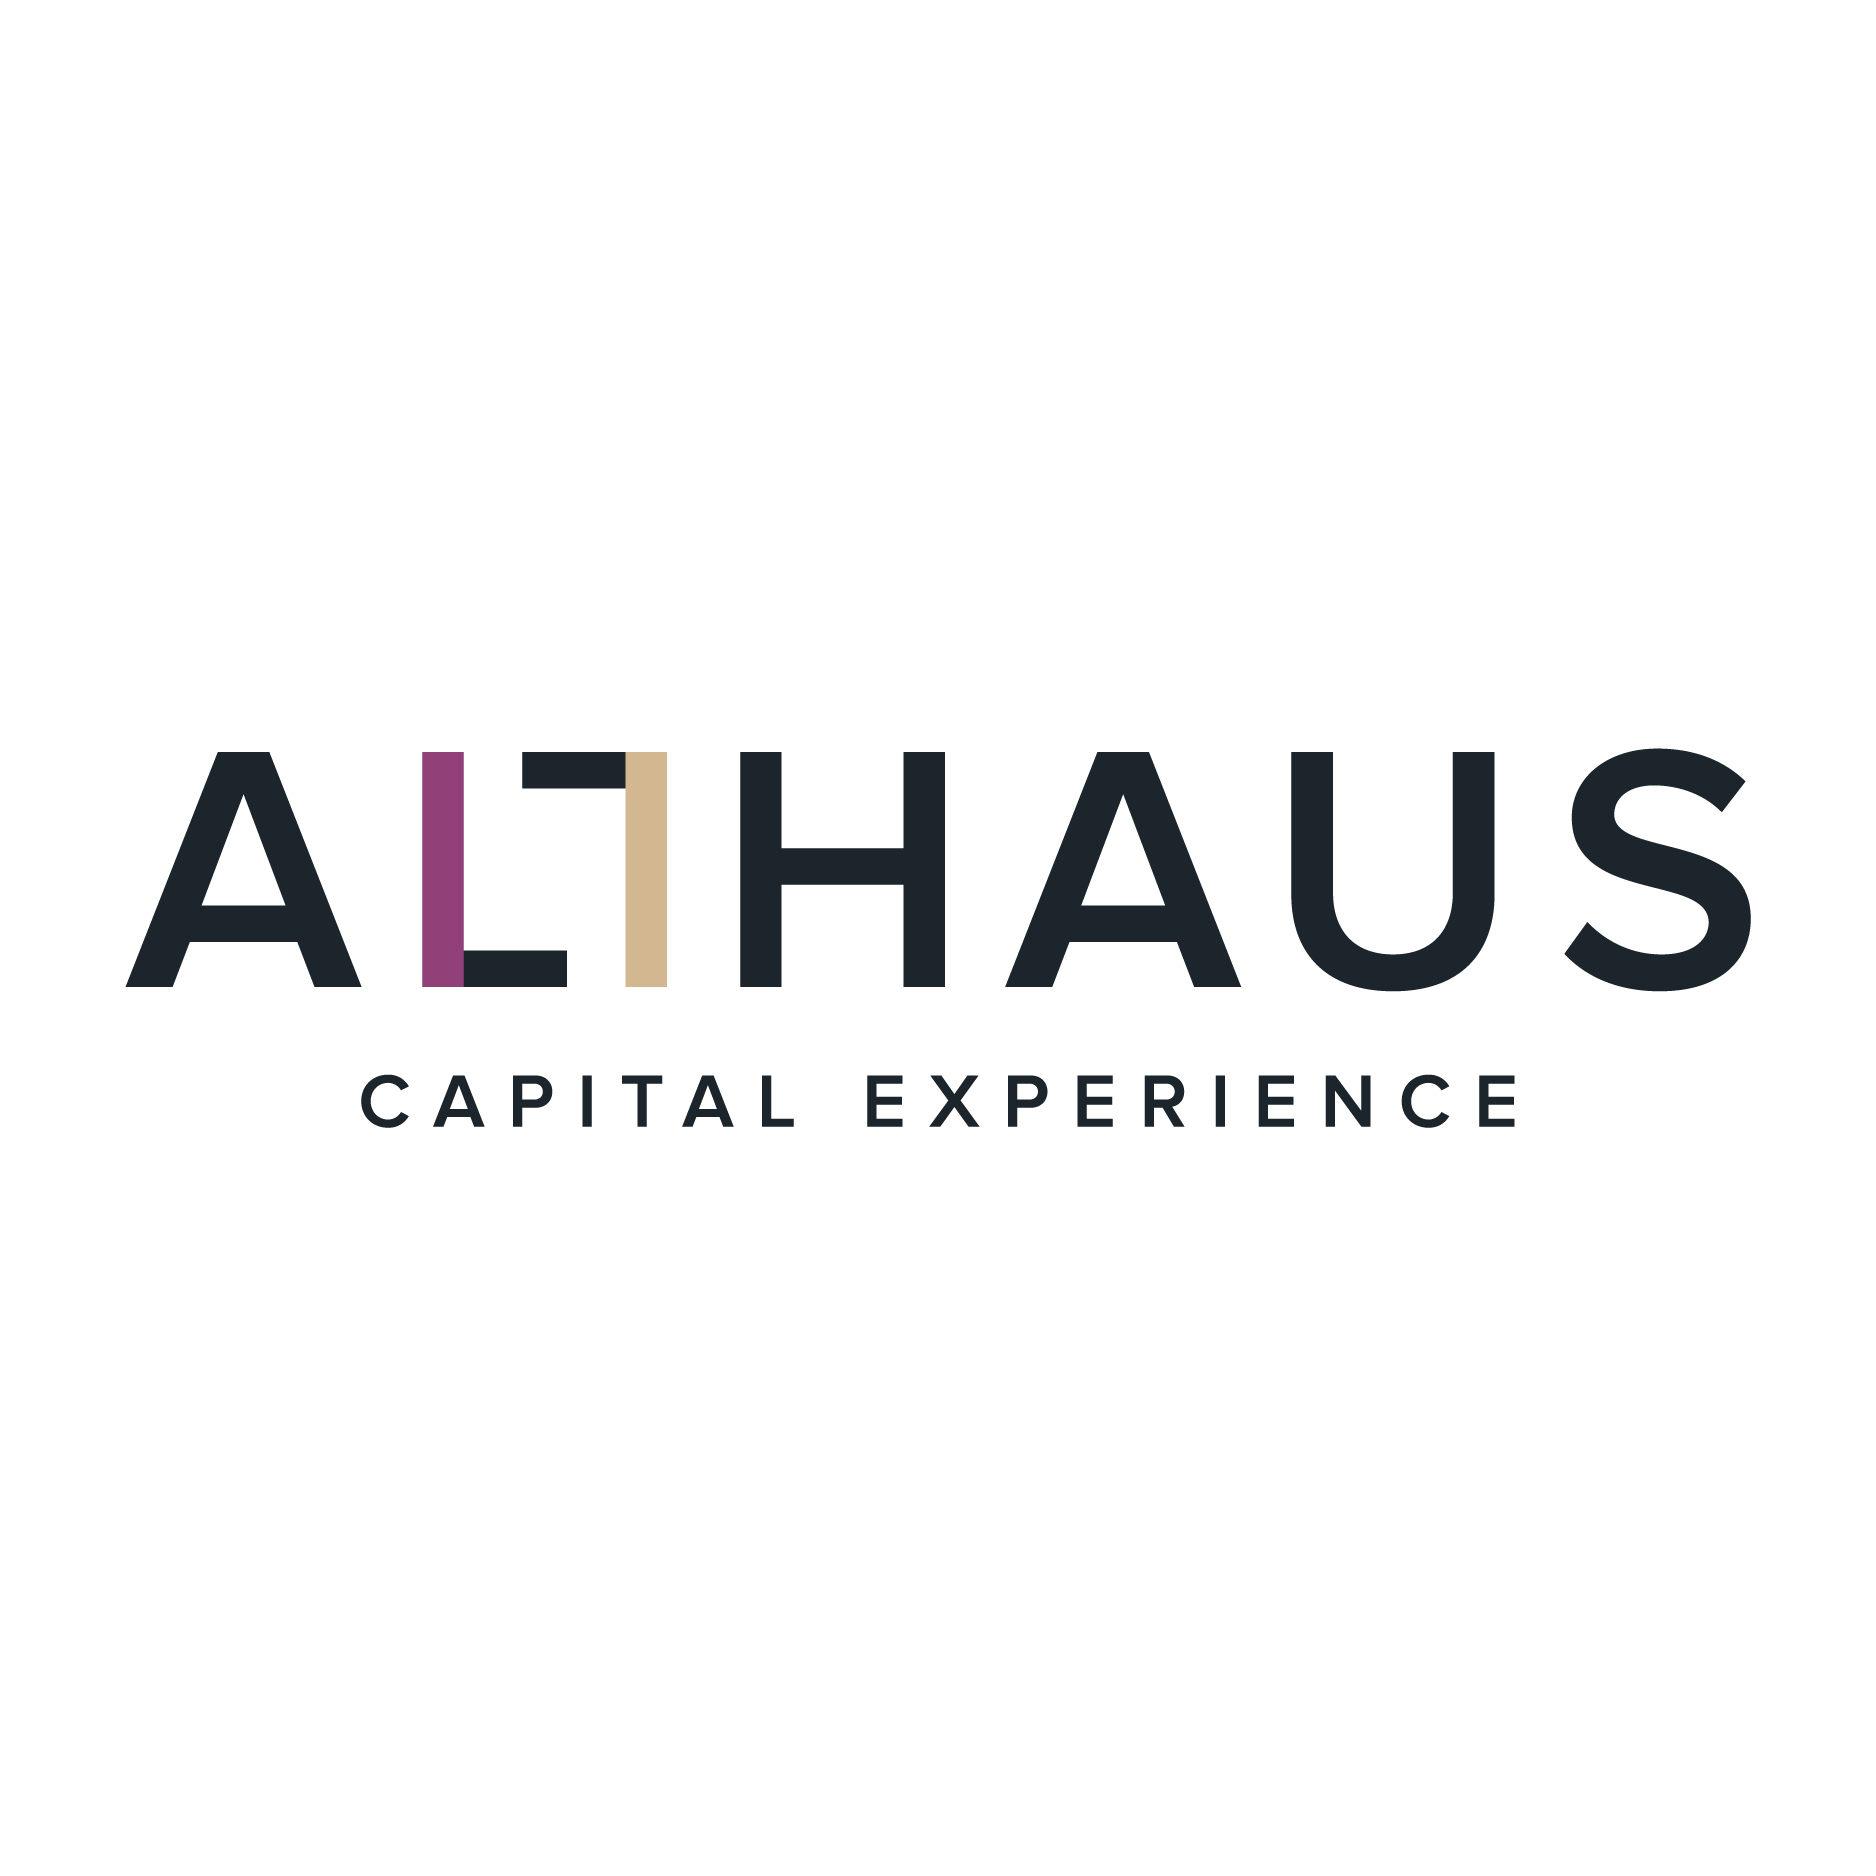 Althaus logo design by logo designer Javier Torres for your inspiration and for the worlds largest logo competition